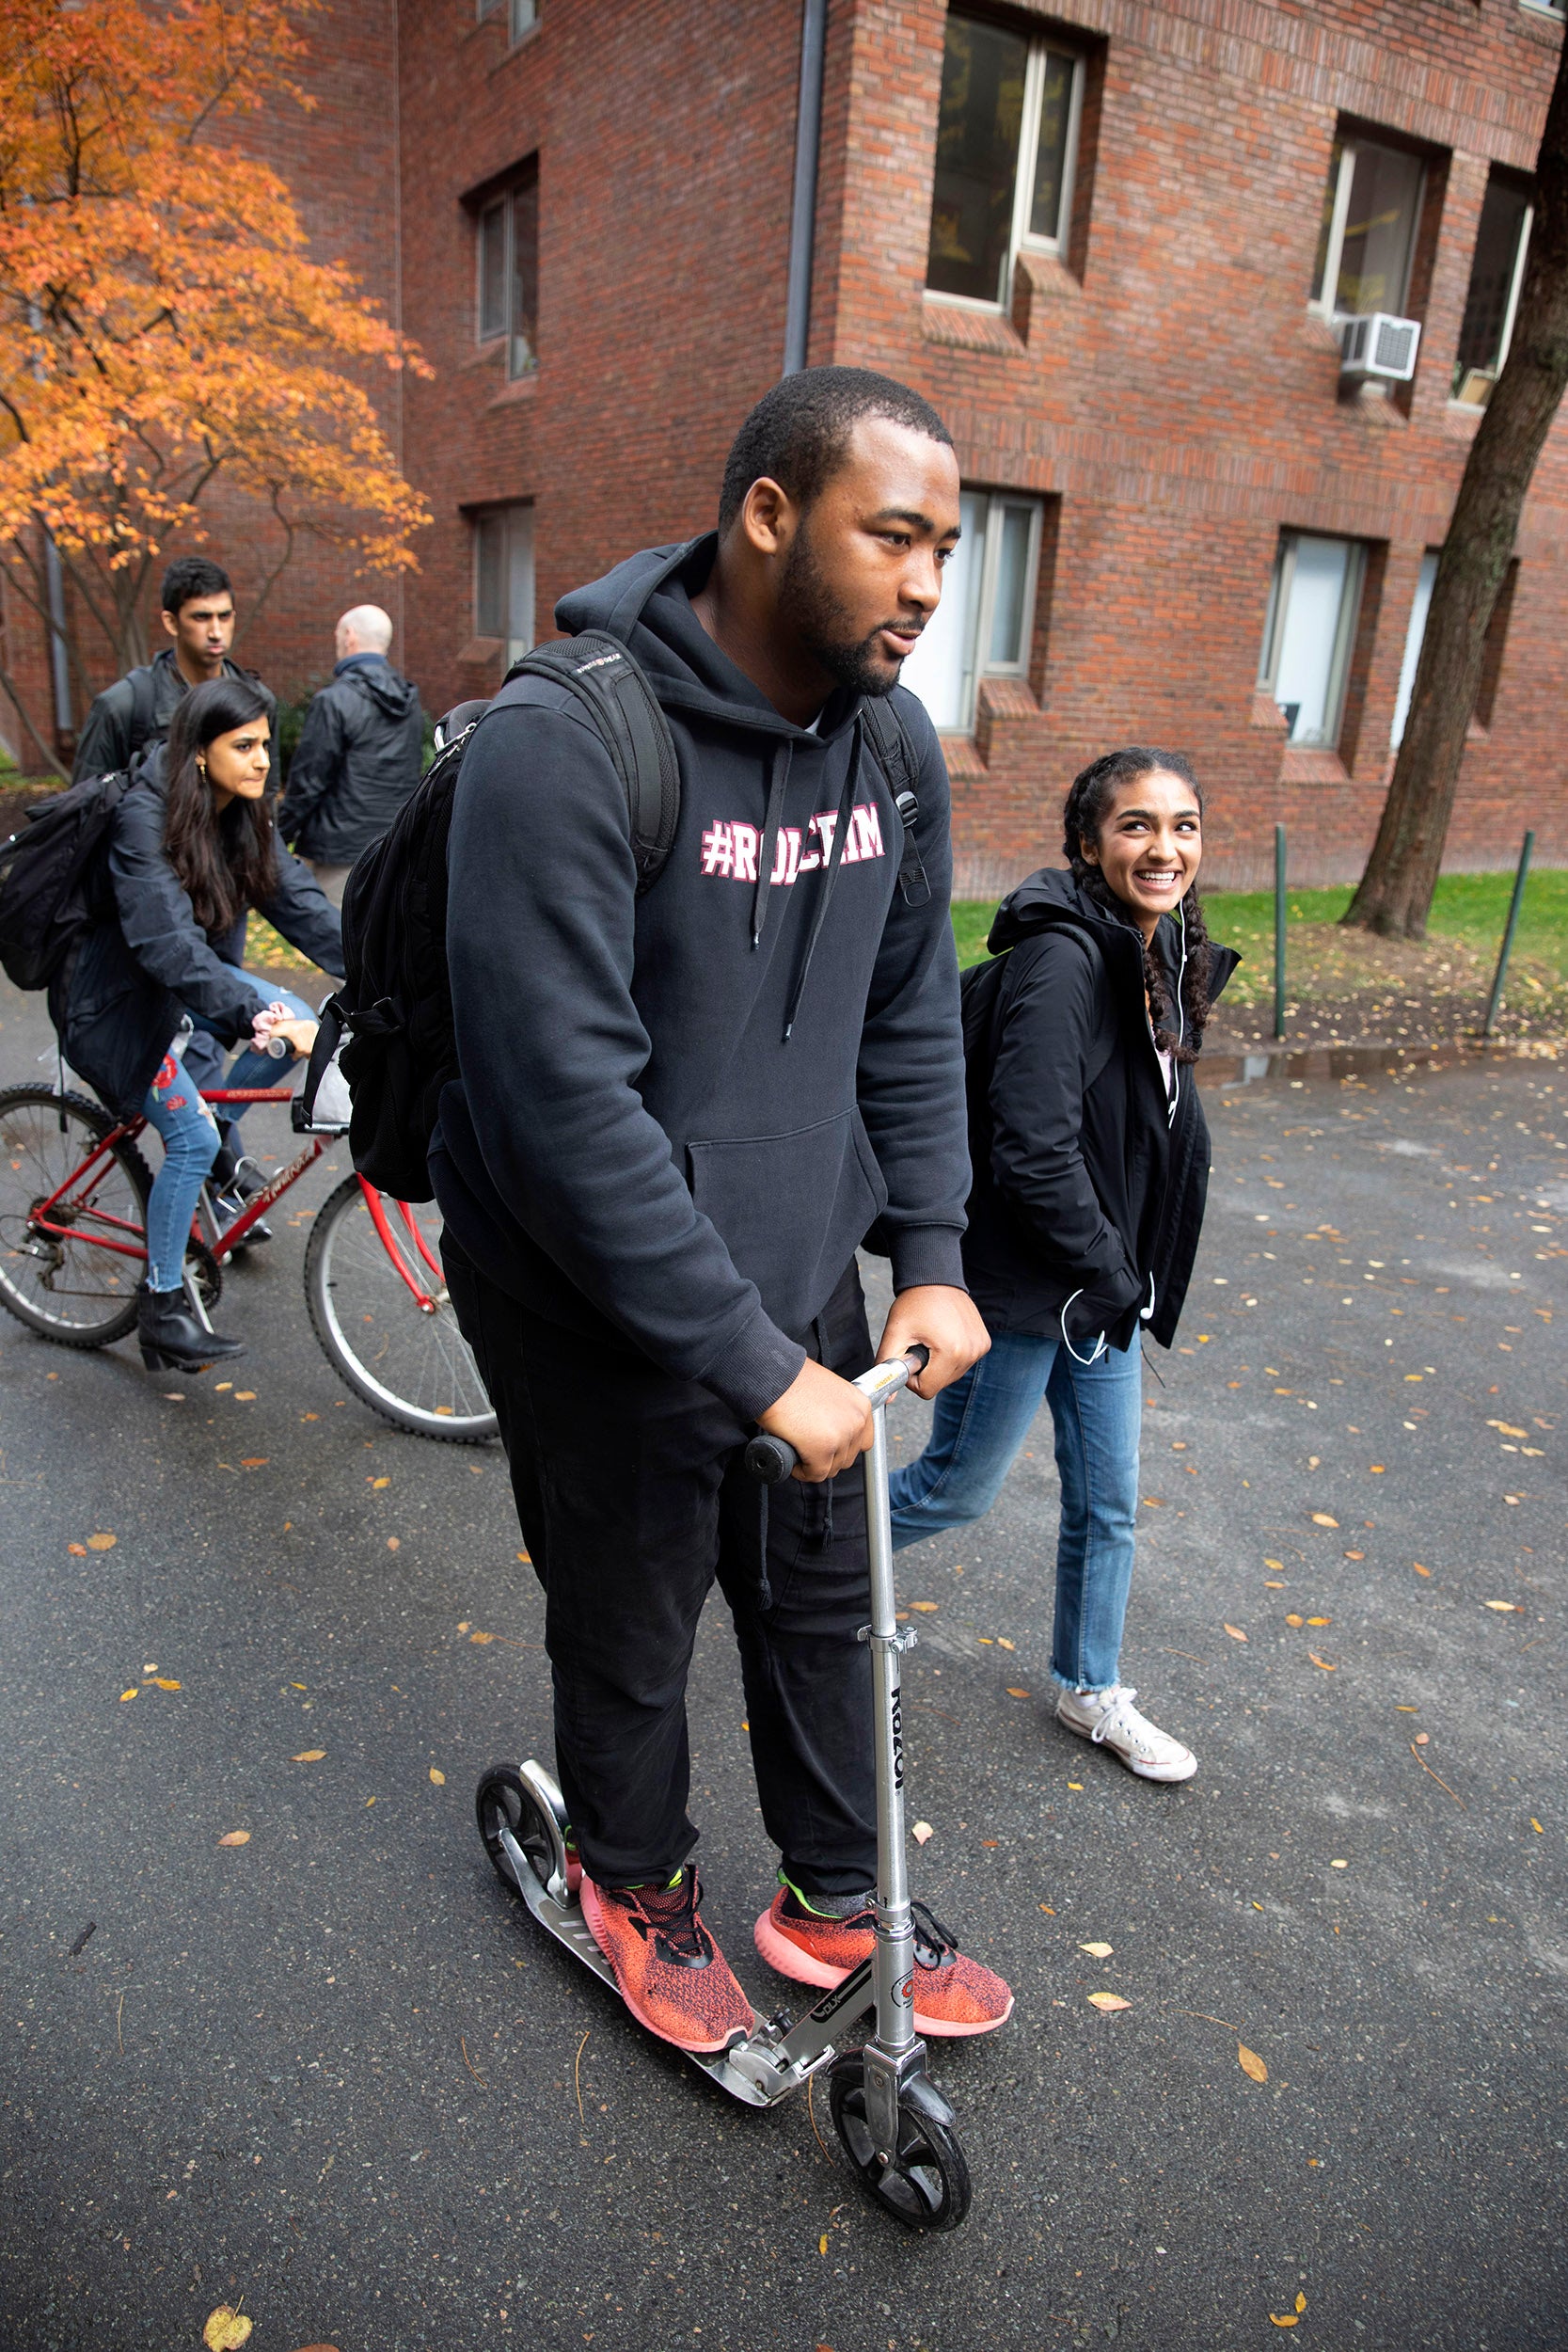 Jacob Sykes rides his scooter, and Noor Kamal walks across campus.